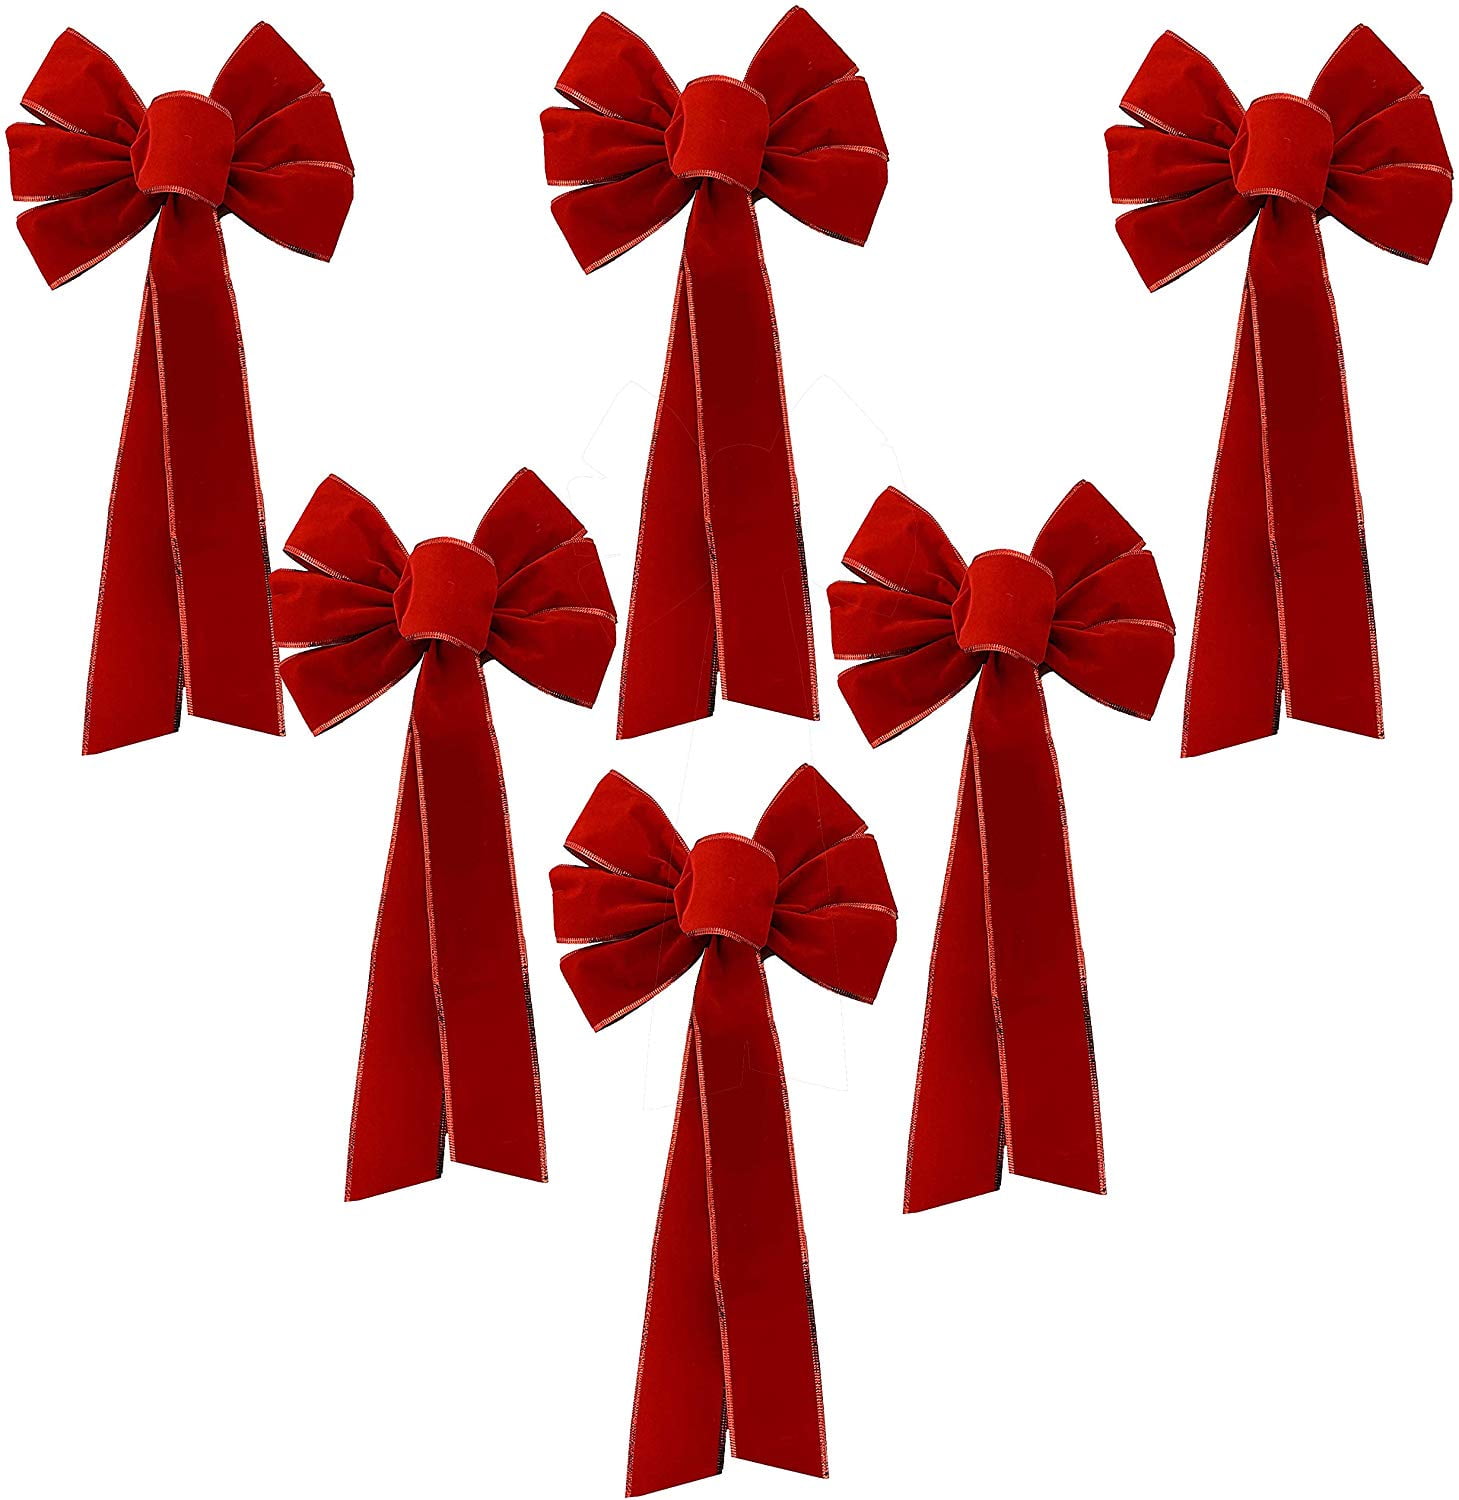 4 Large 10" Hand Made Poinsettia Christmas Bows Wreath Ribbon Red Outdoor Bow 